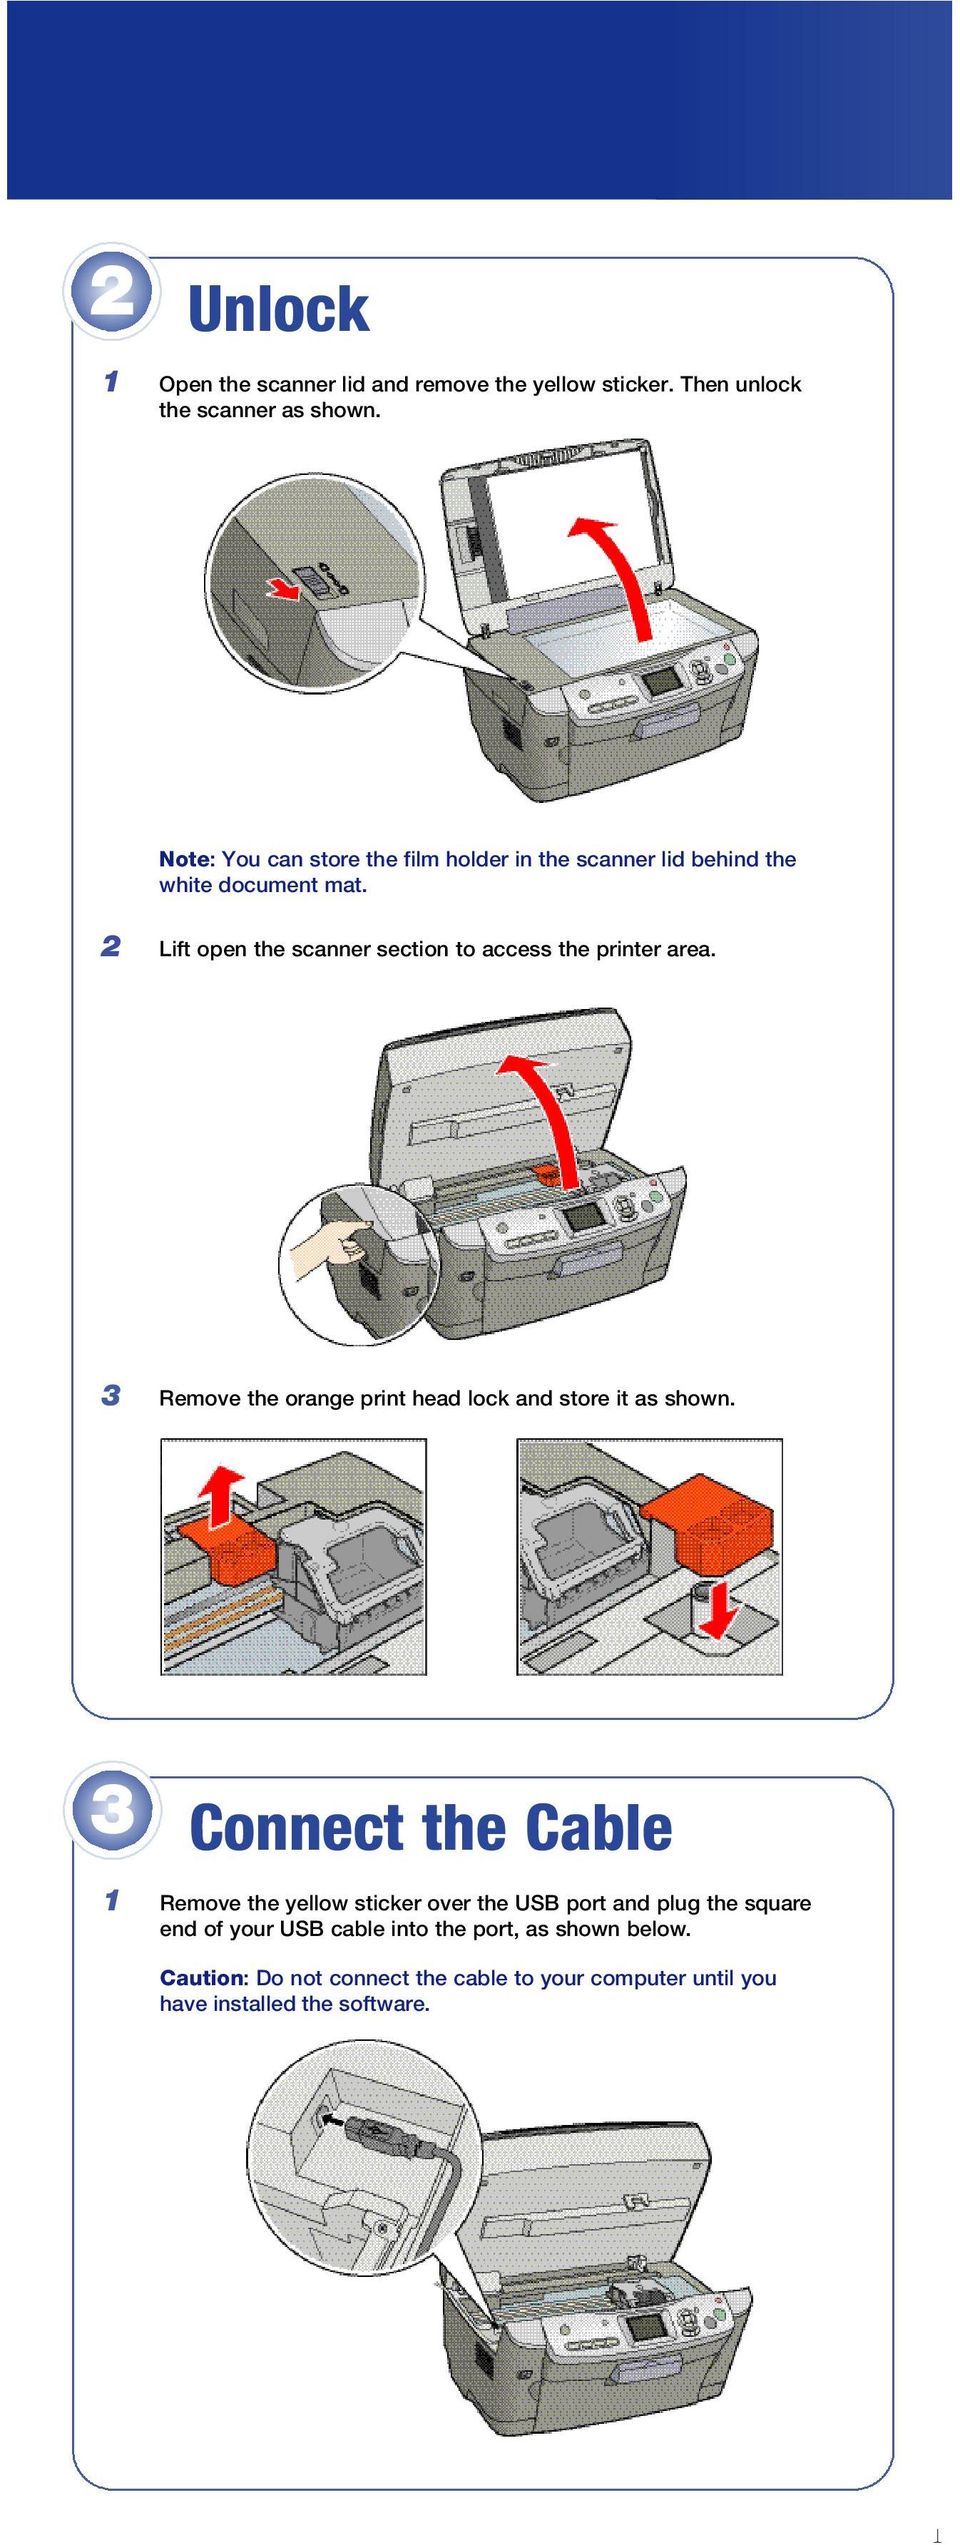 Lift open the scanner section to access the printer area. Remove the orange print head lock and store it as shown.